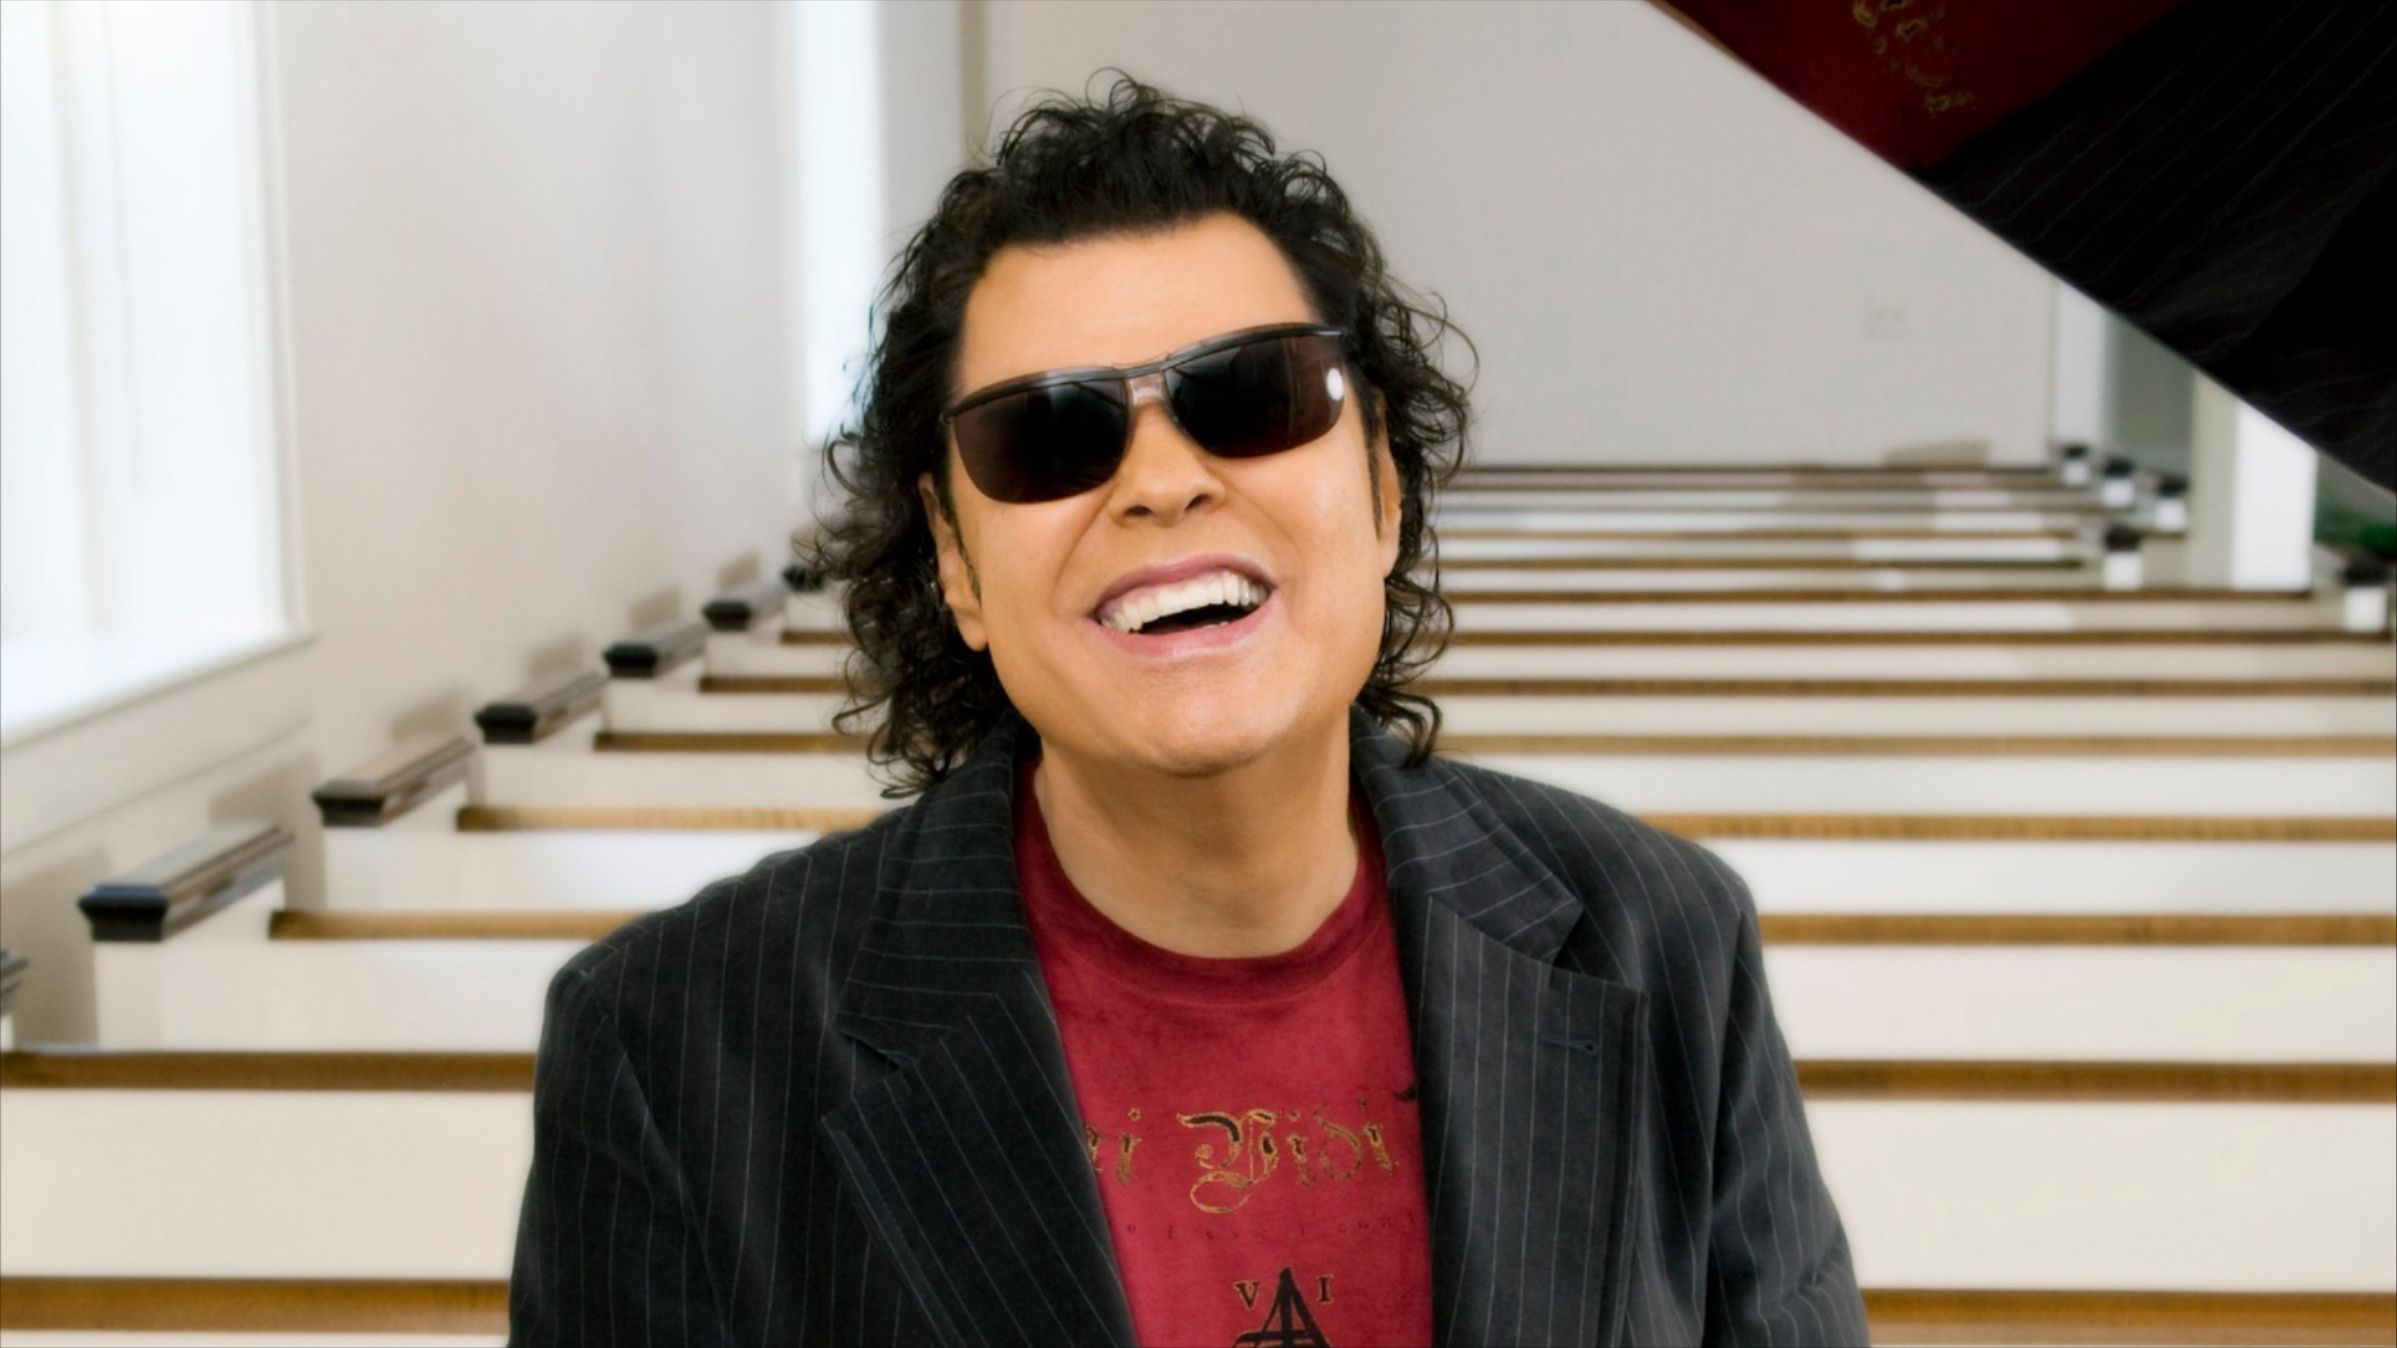 CANCELED - An Evening with Ronnie Milsap